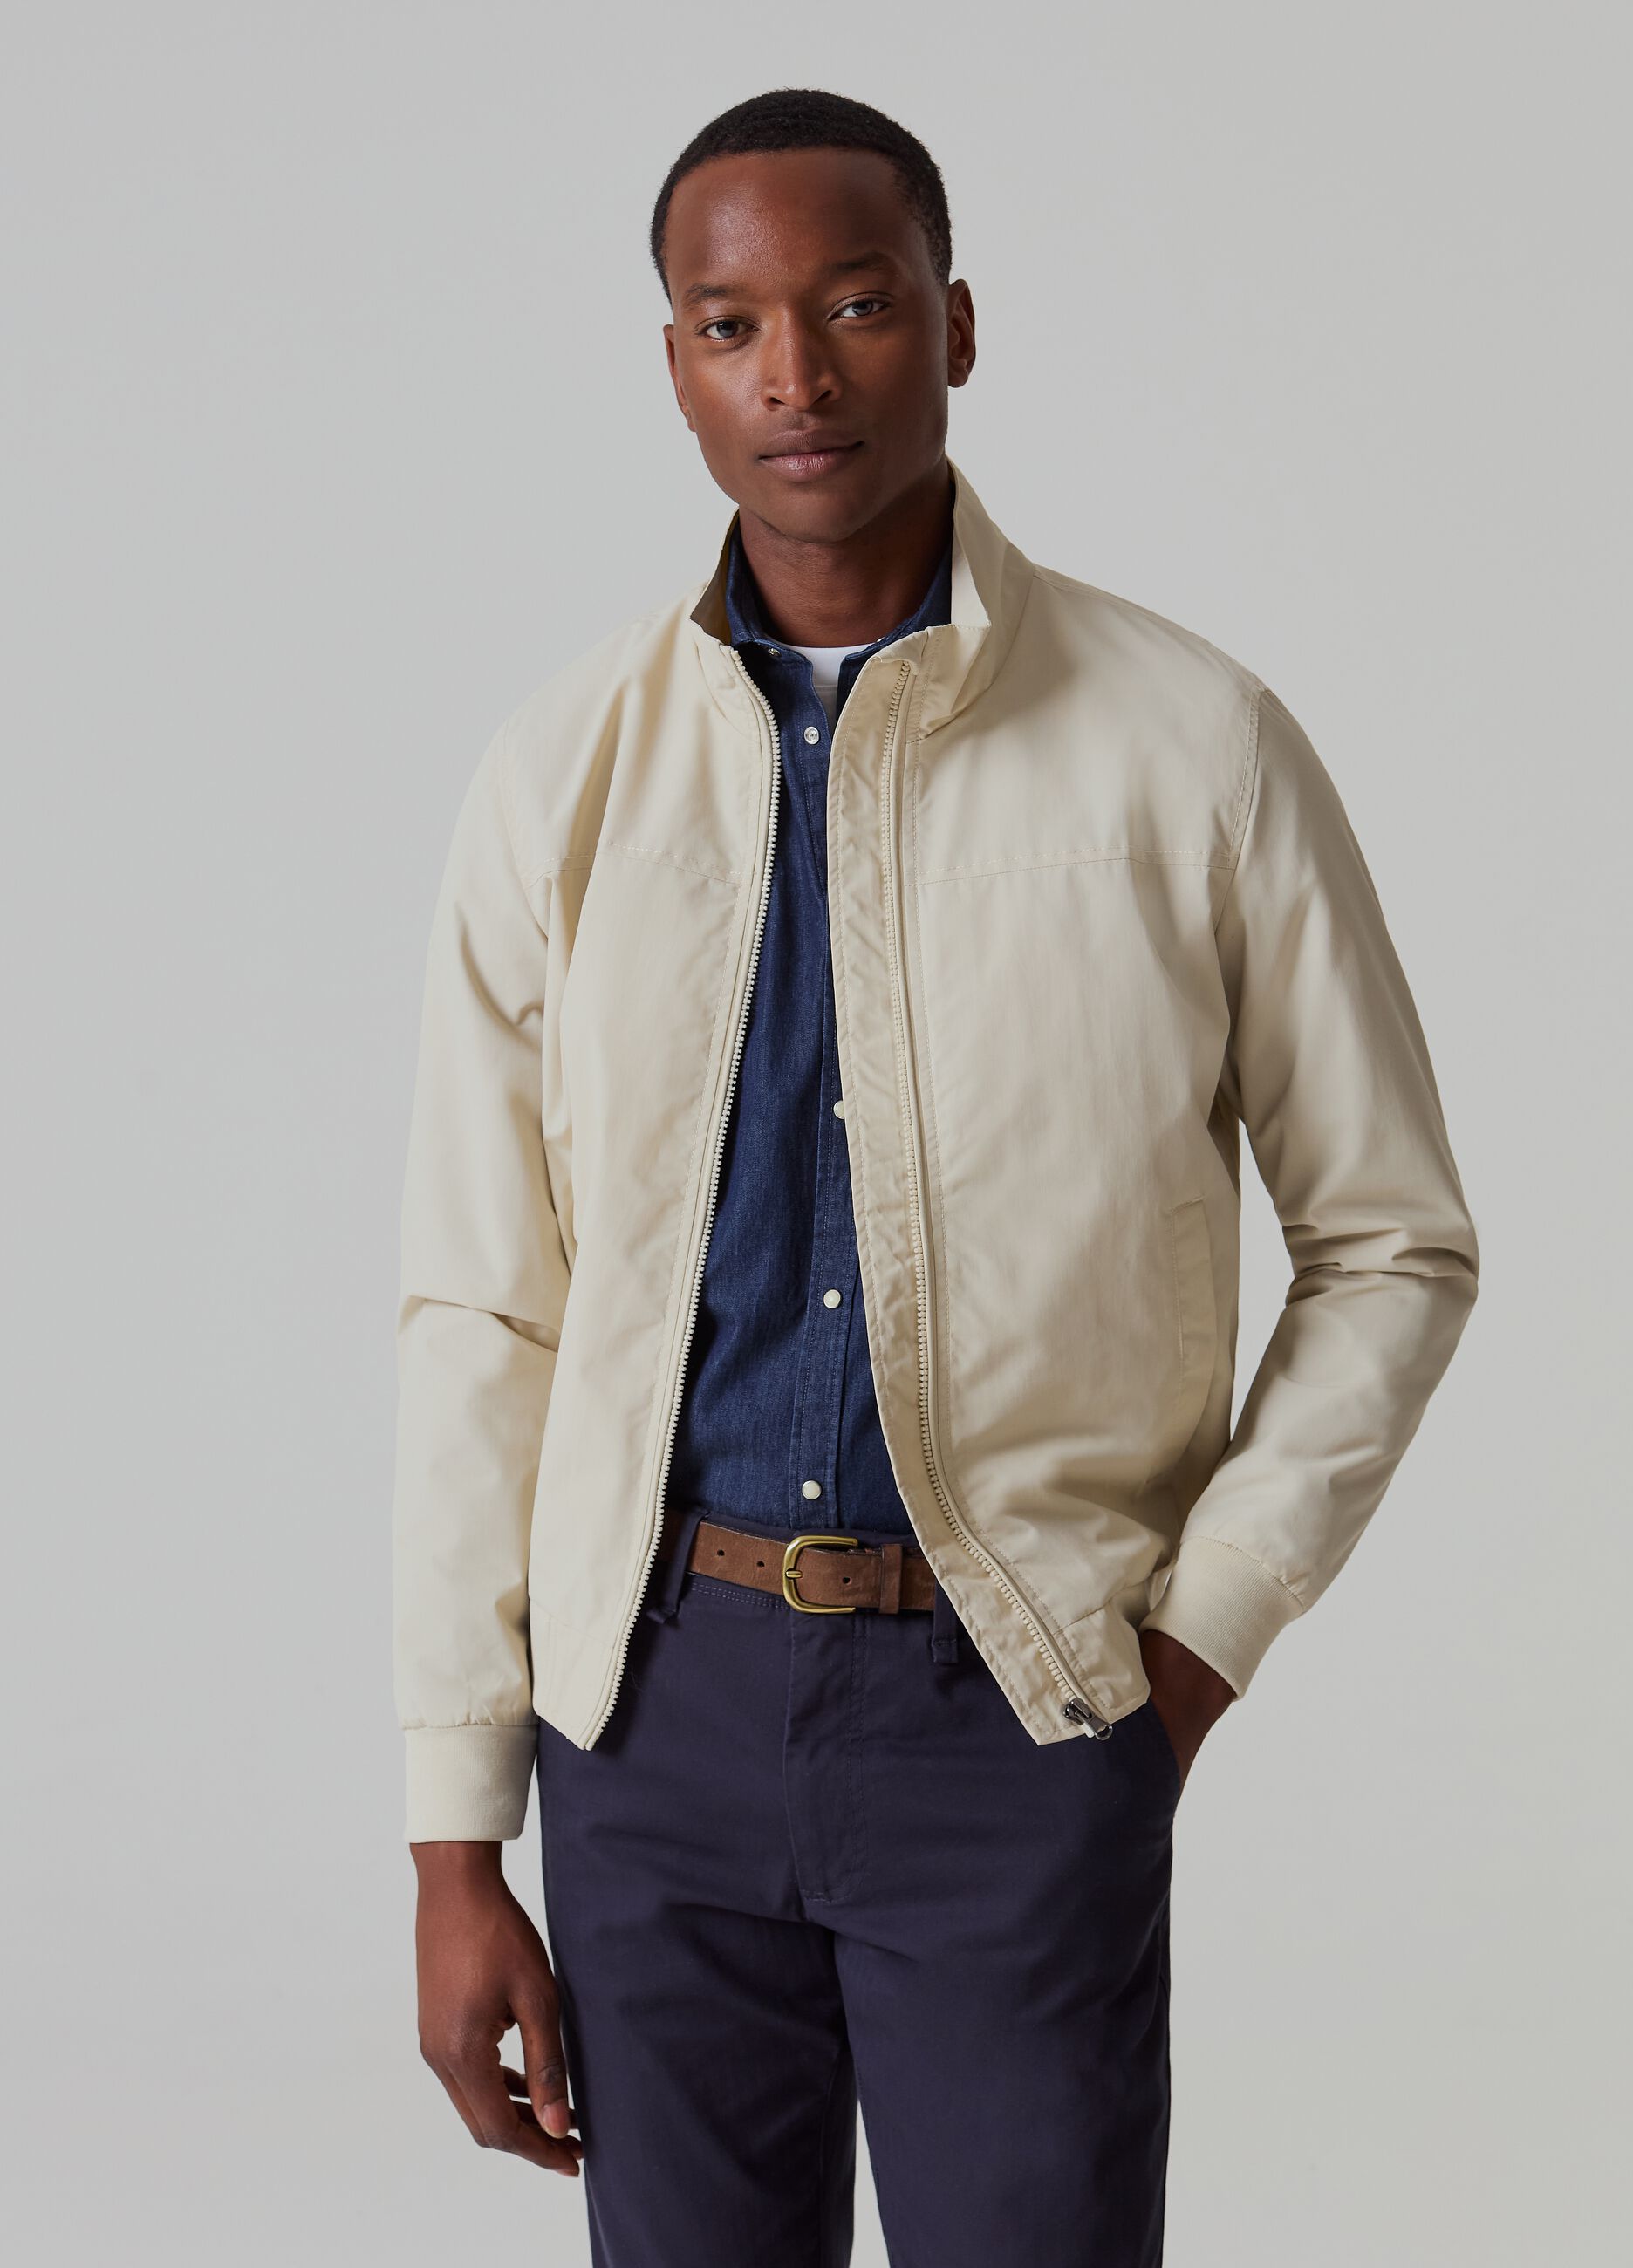 Full-zip bomber jacket with high neck